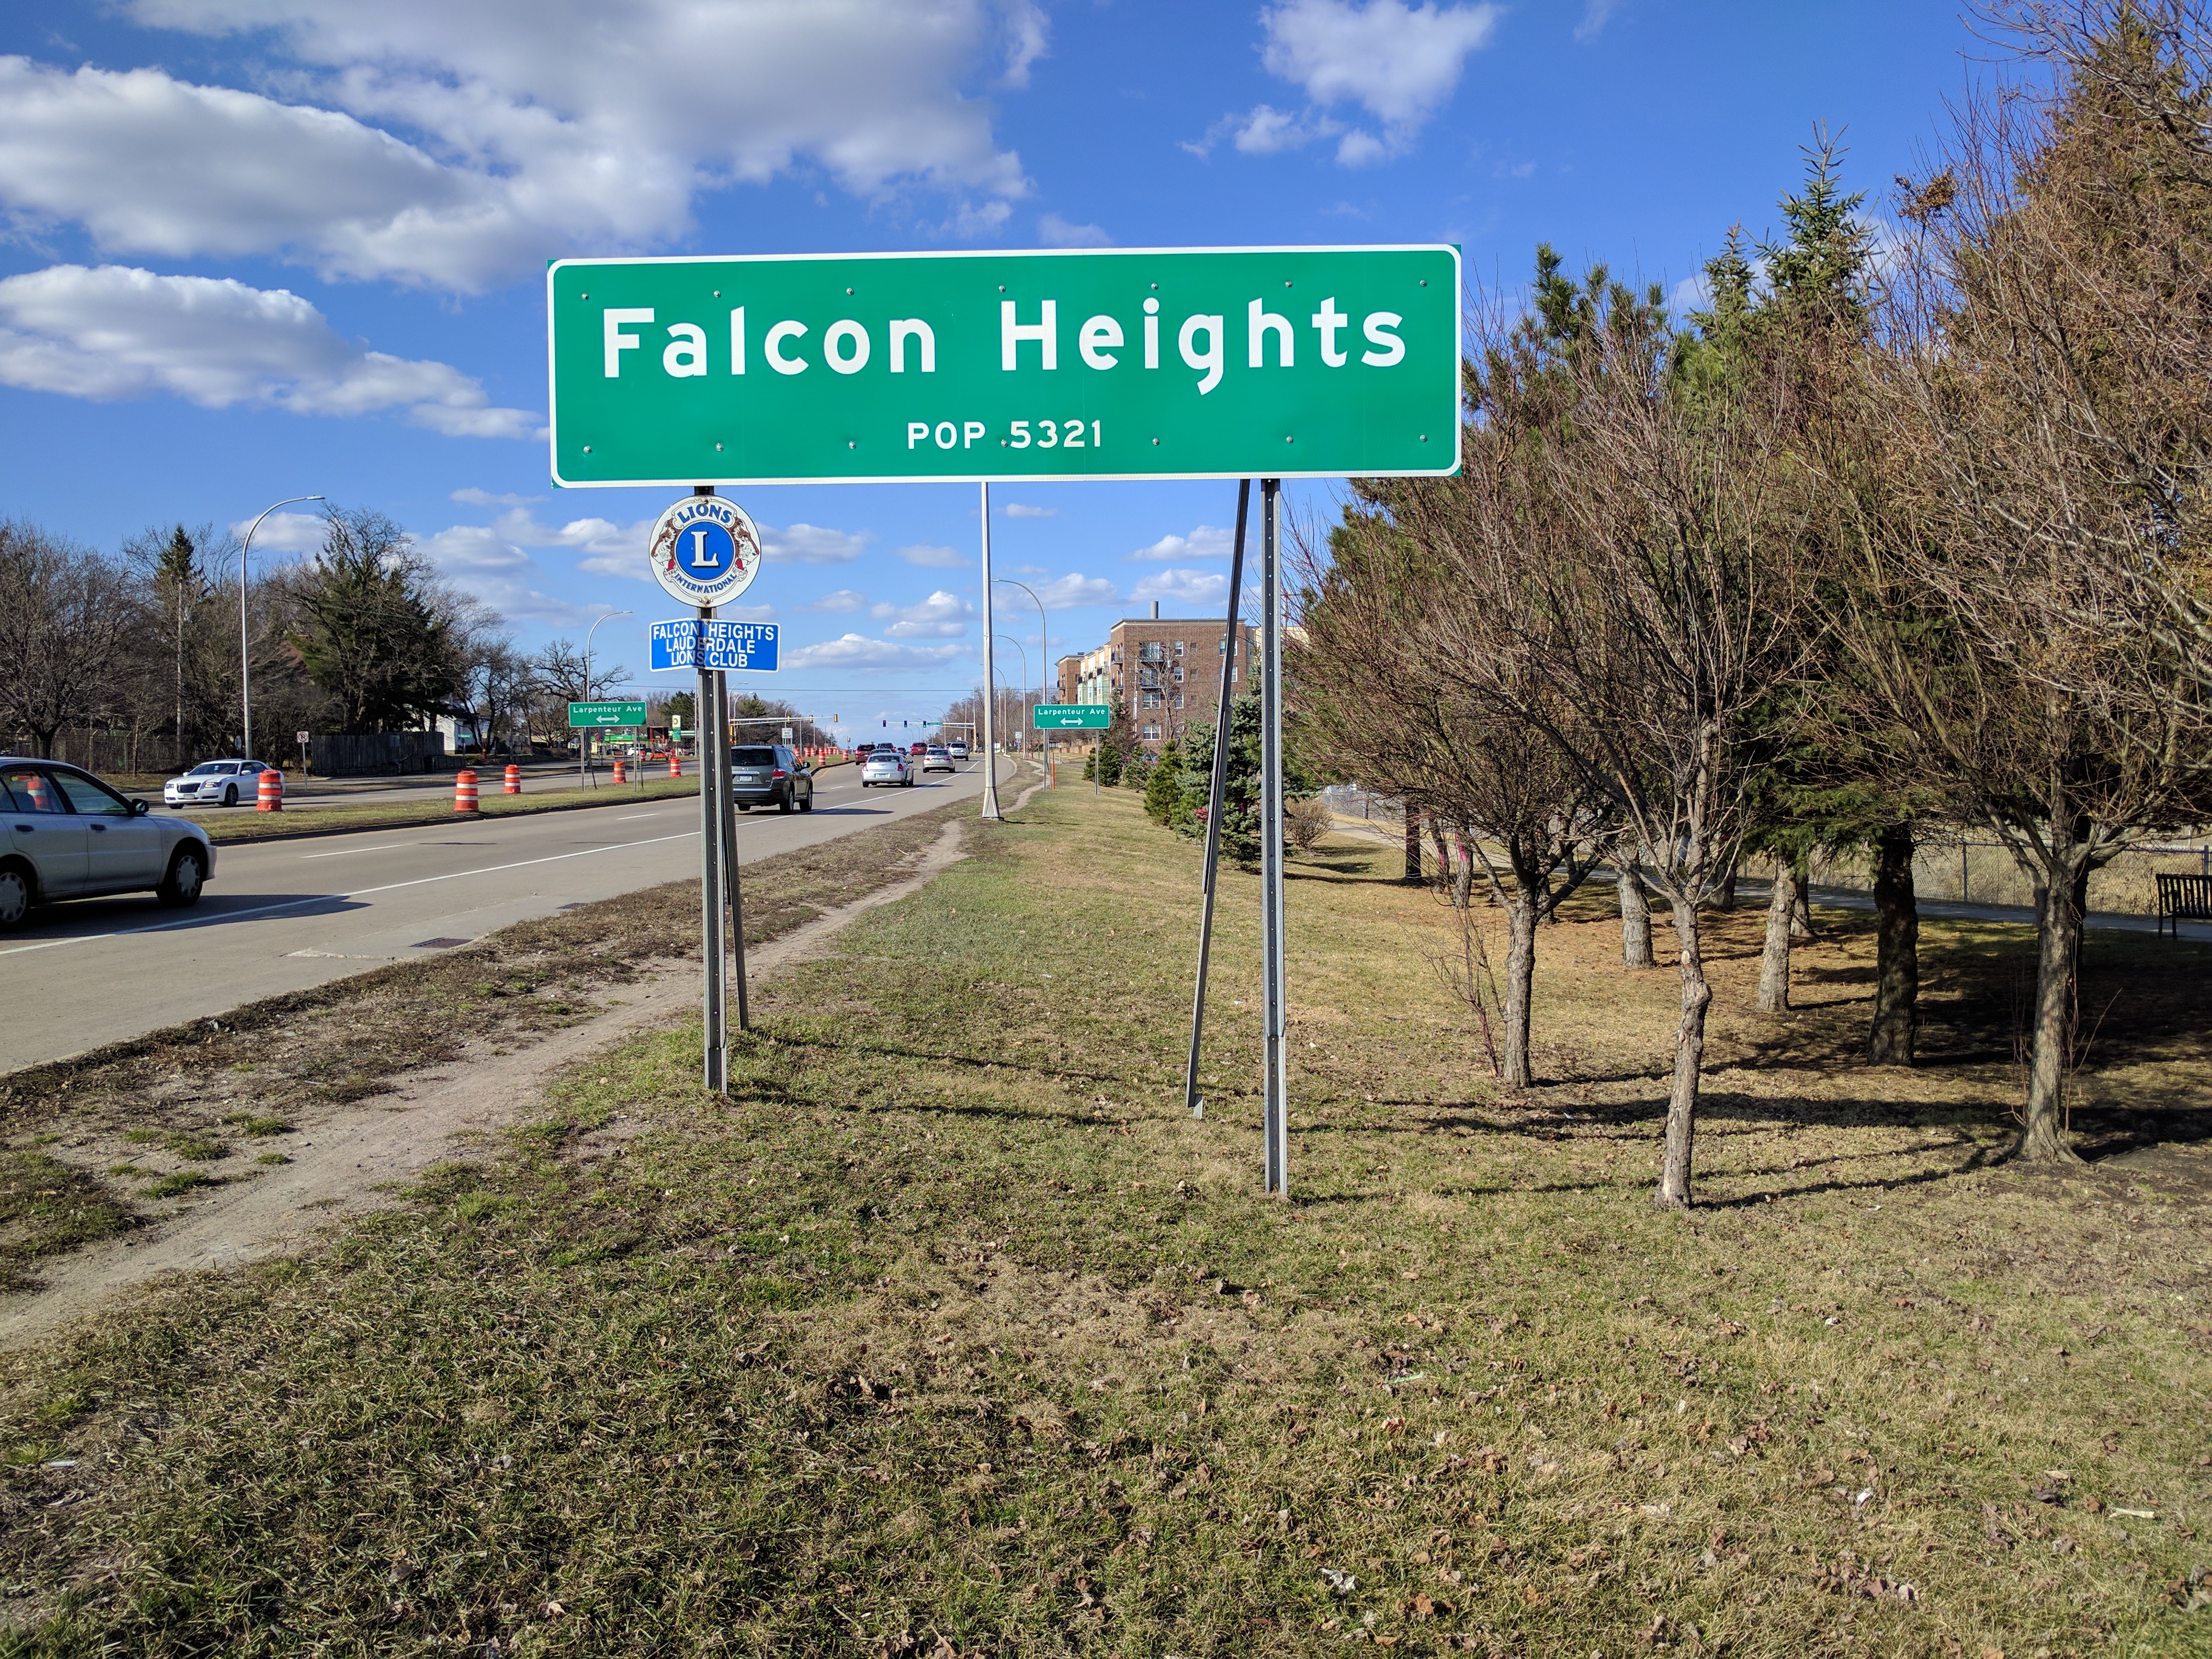 File:Curtiss Field (Falcon Heights) 04.jpg - Wikimedia Commons